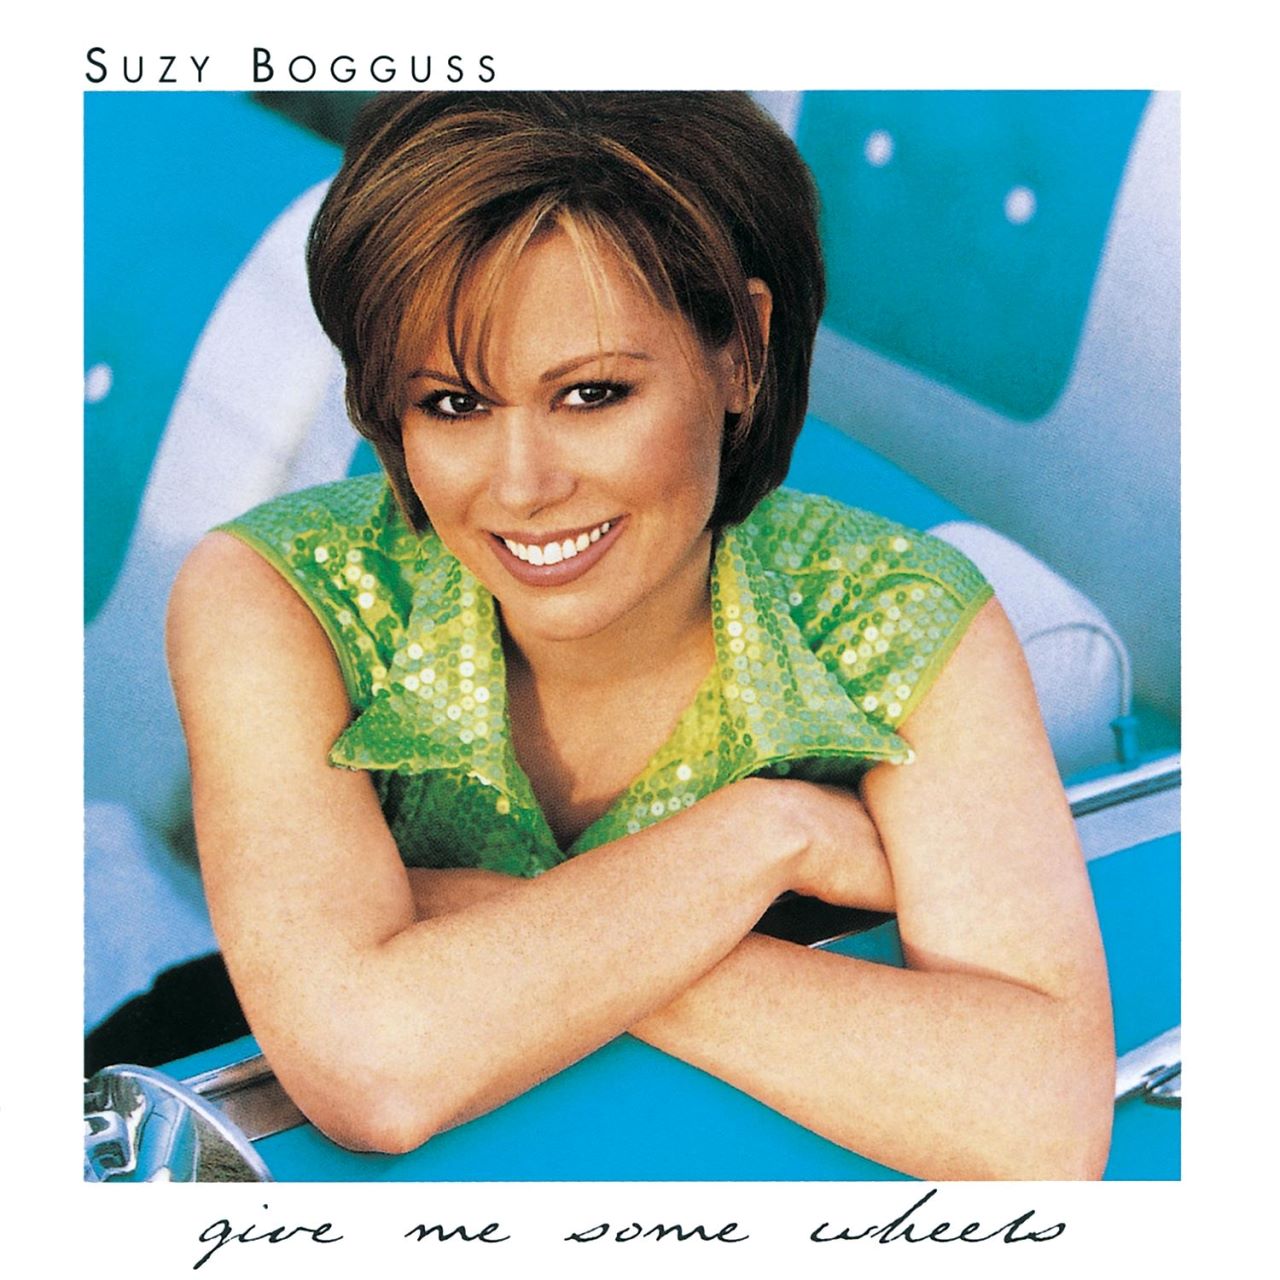 Suzy Bogguss - Give Me Some Wheels cover album